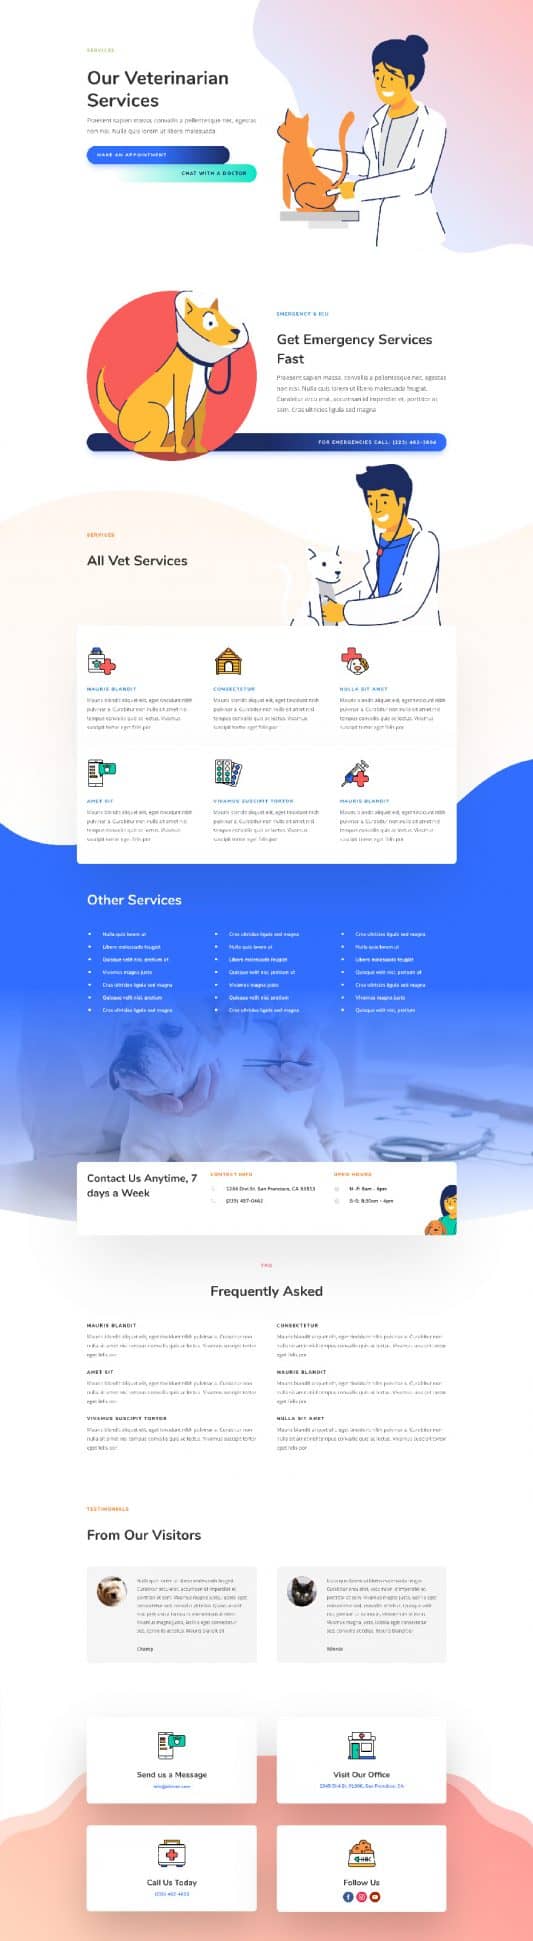 Veterinarian Services Page Style